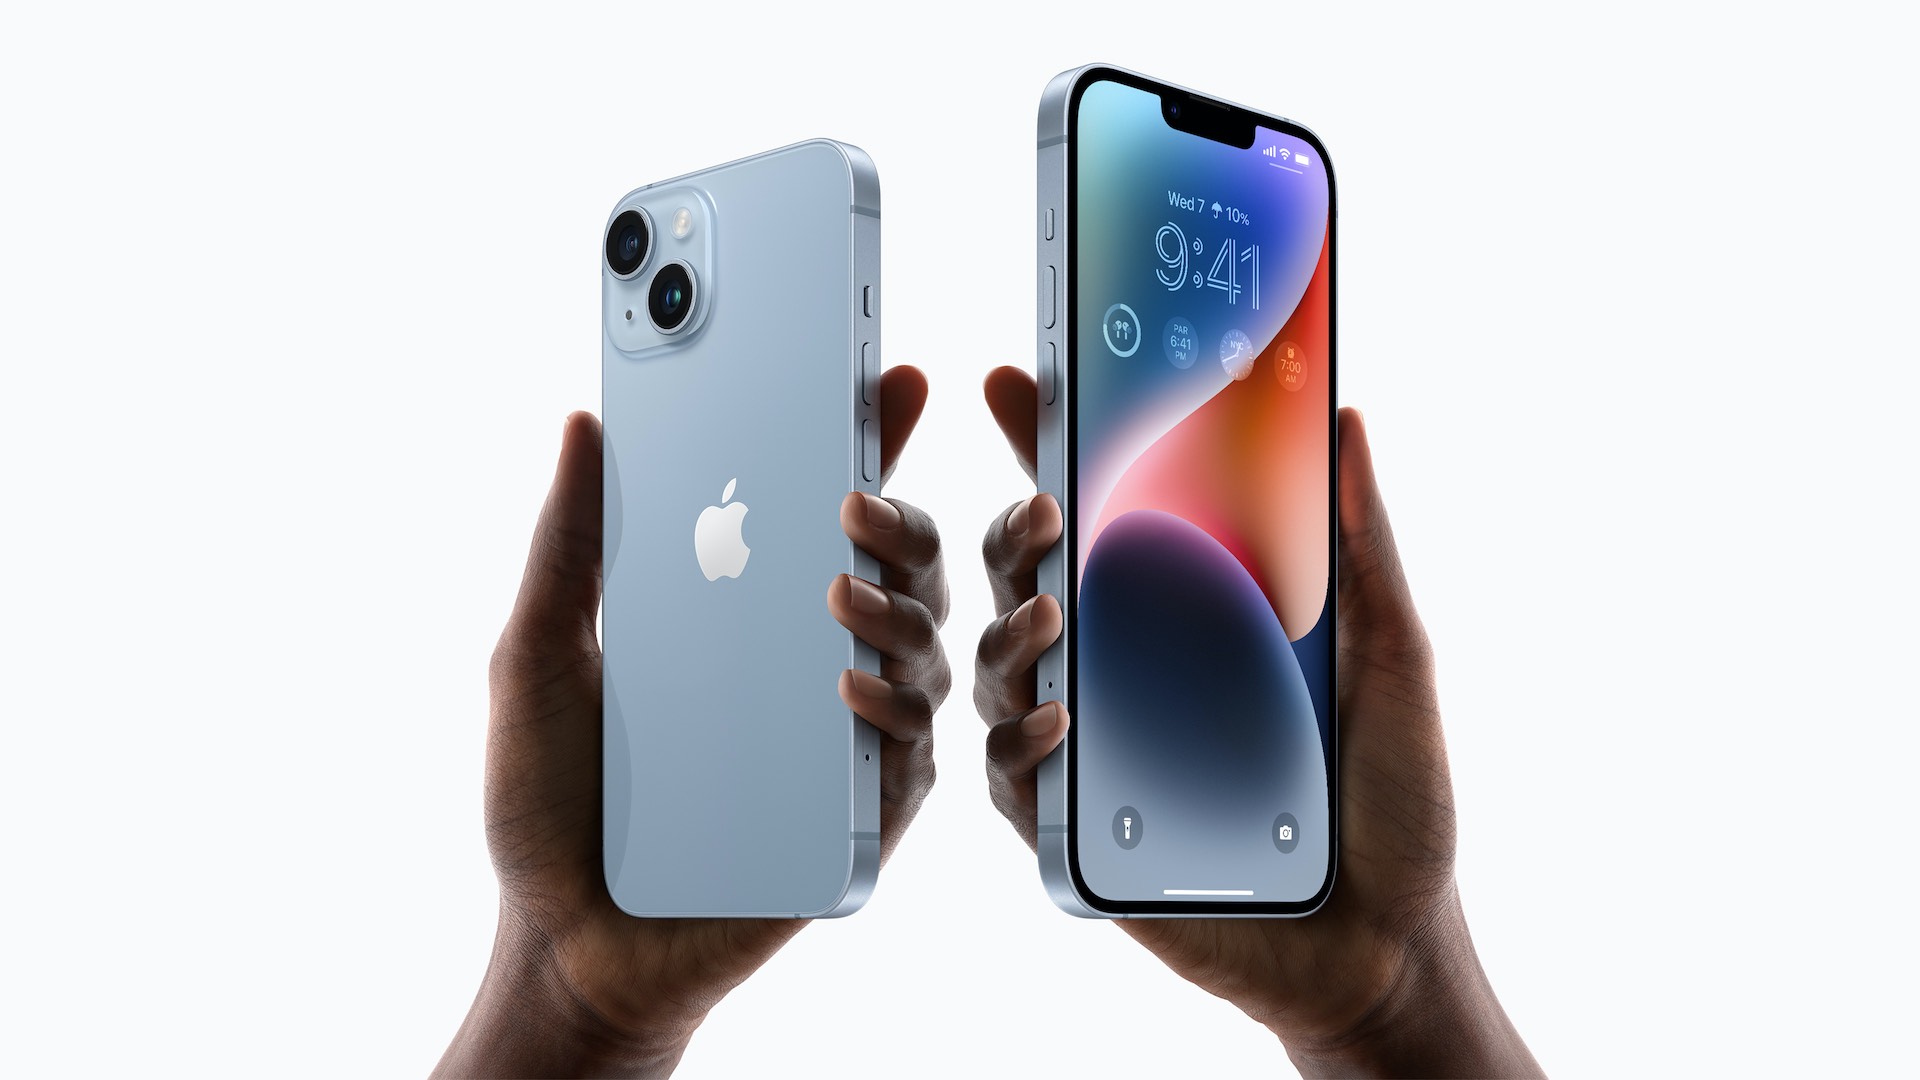 iPhone shipments to surpass Samsung in 2023, says renowned analyst